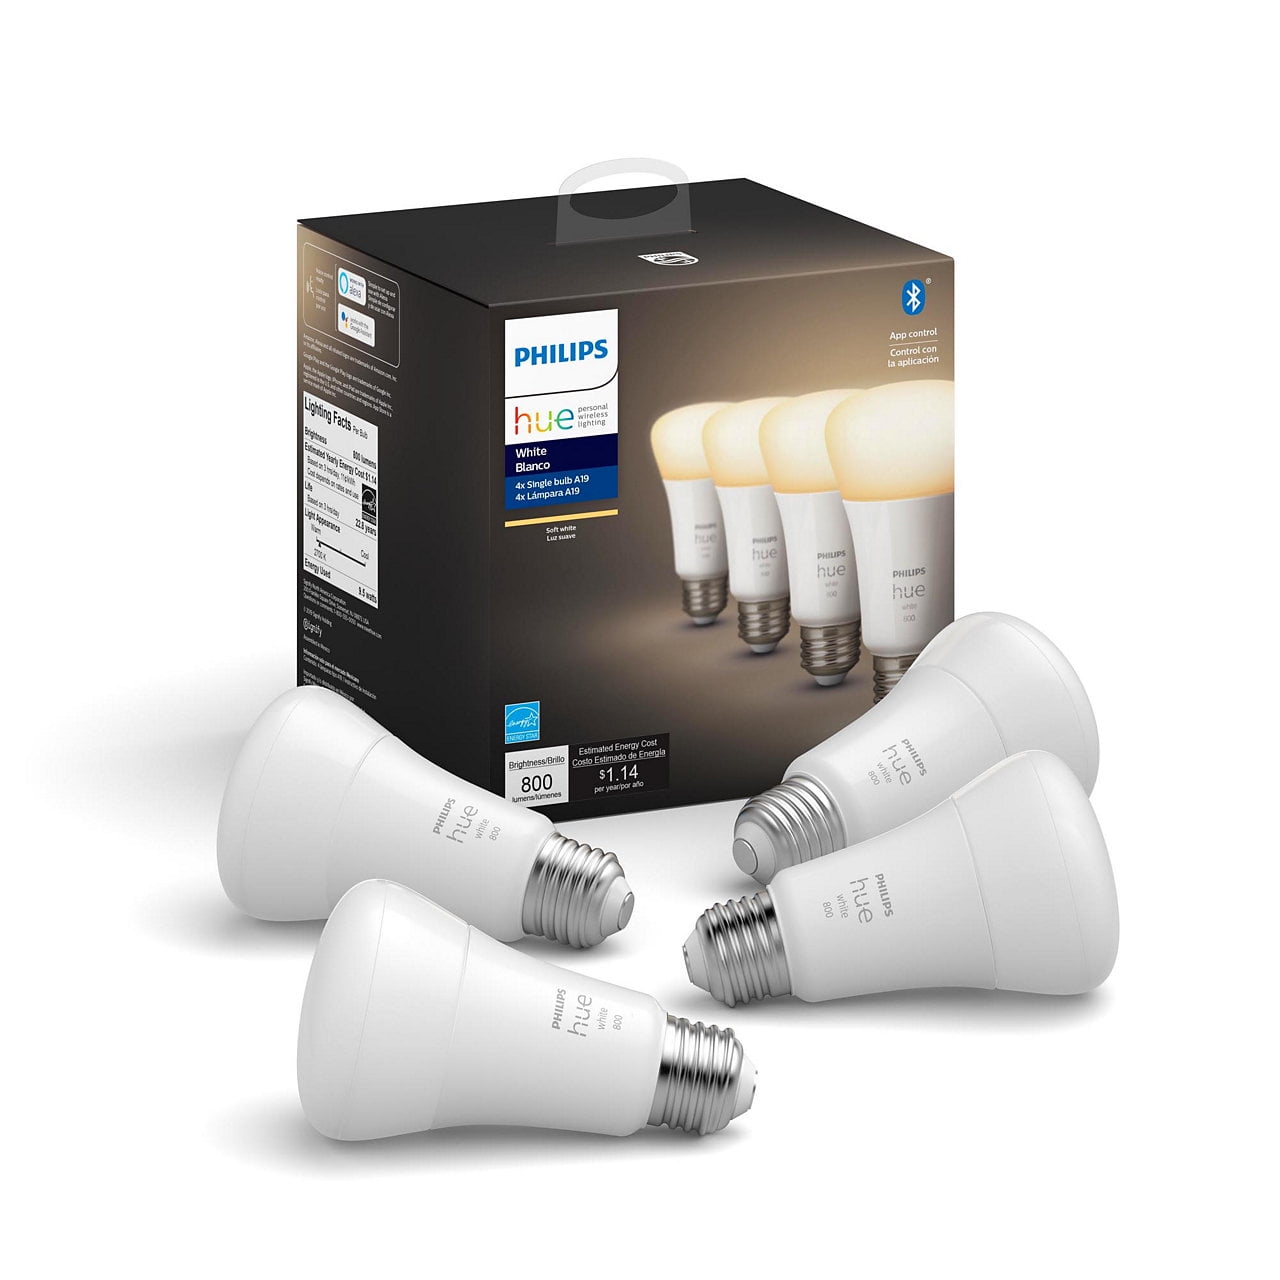 Philips Hue A19 Bulb with Bluetooth 562785 B&H Photo Video